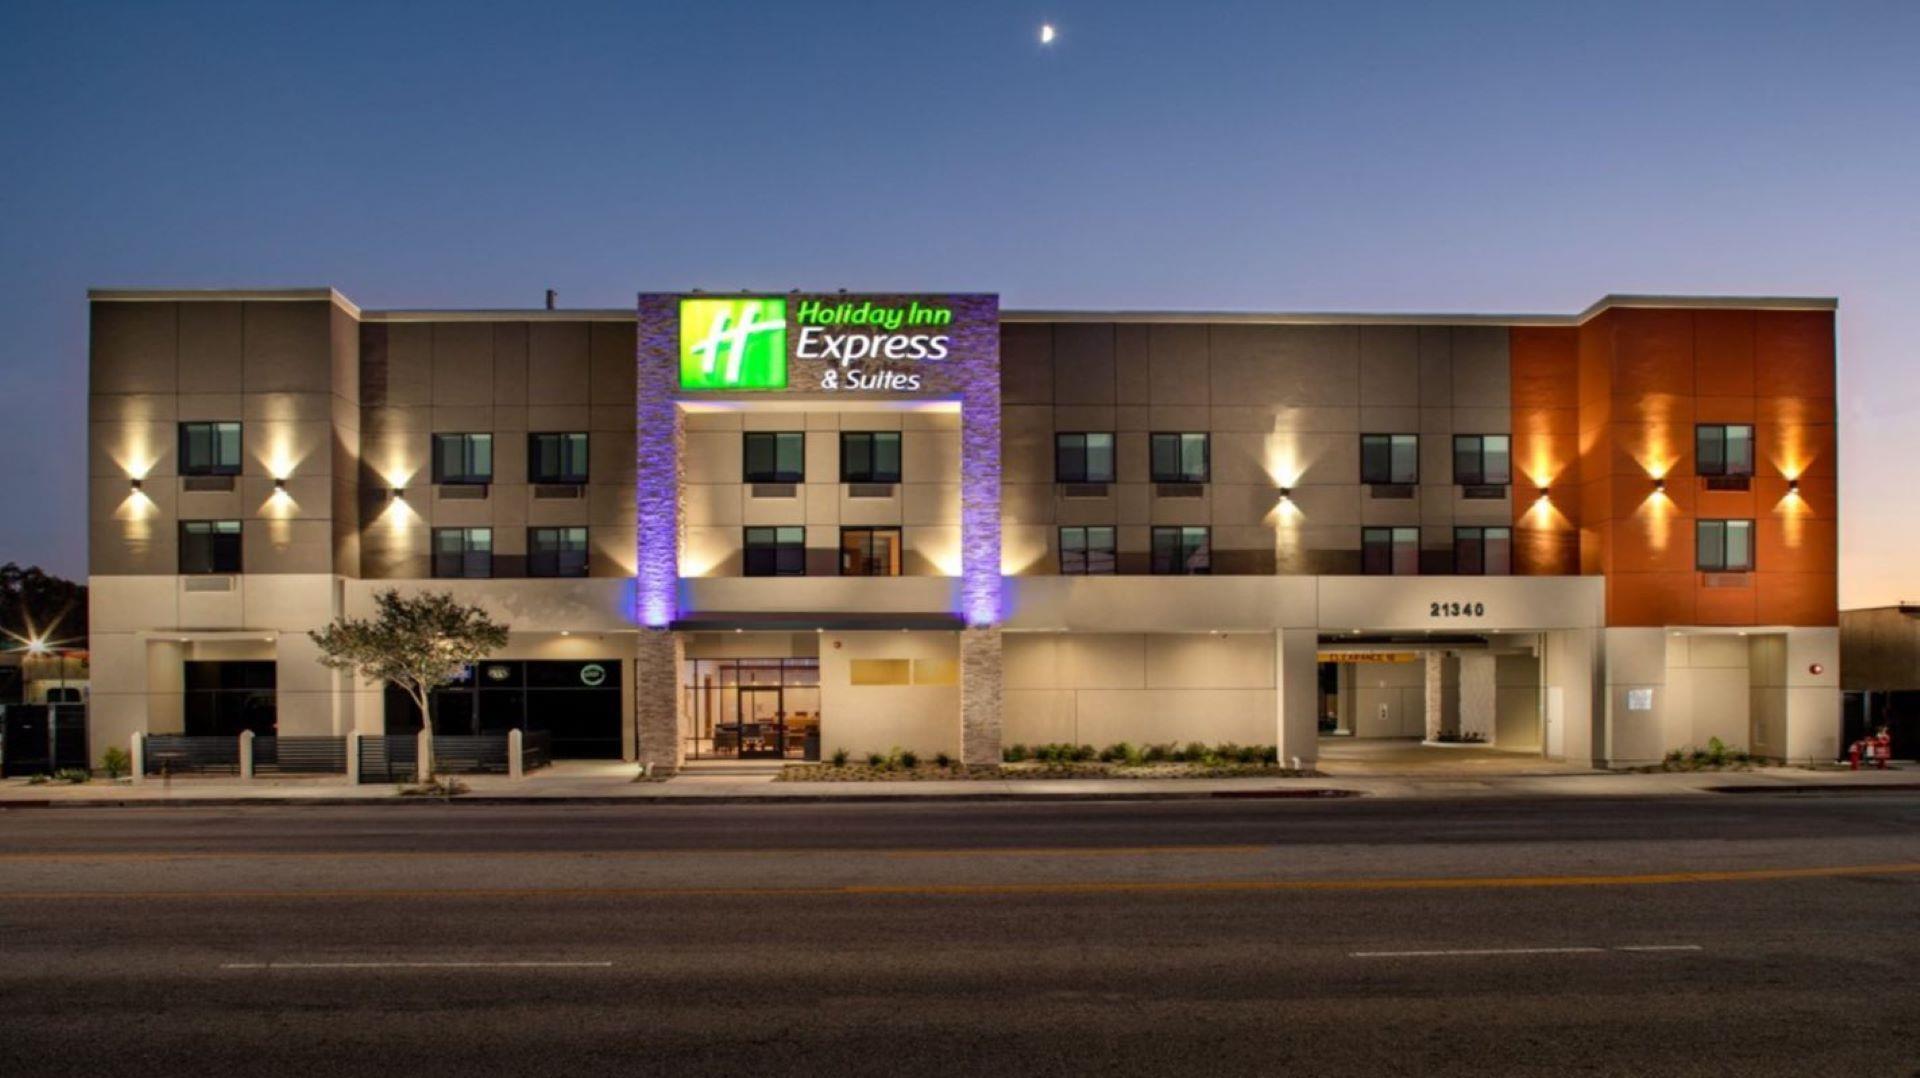 Holiday Inn Express & Suites Chatsworth Hotel in Chatsworth, CA